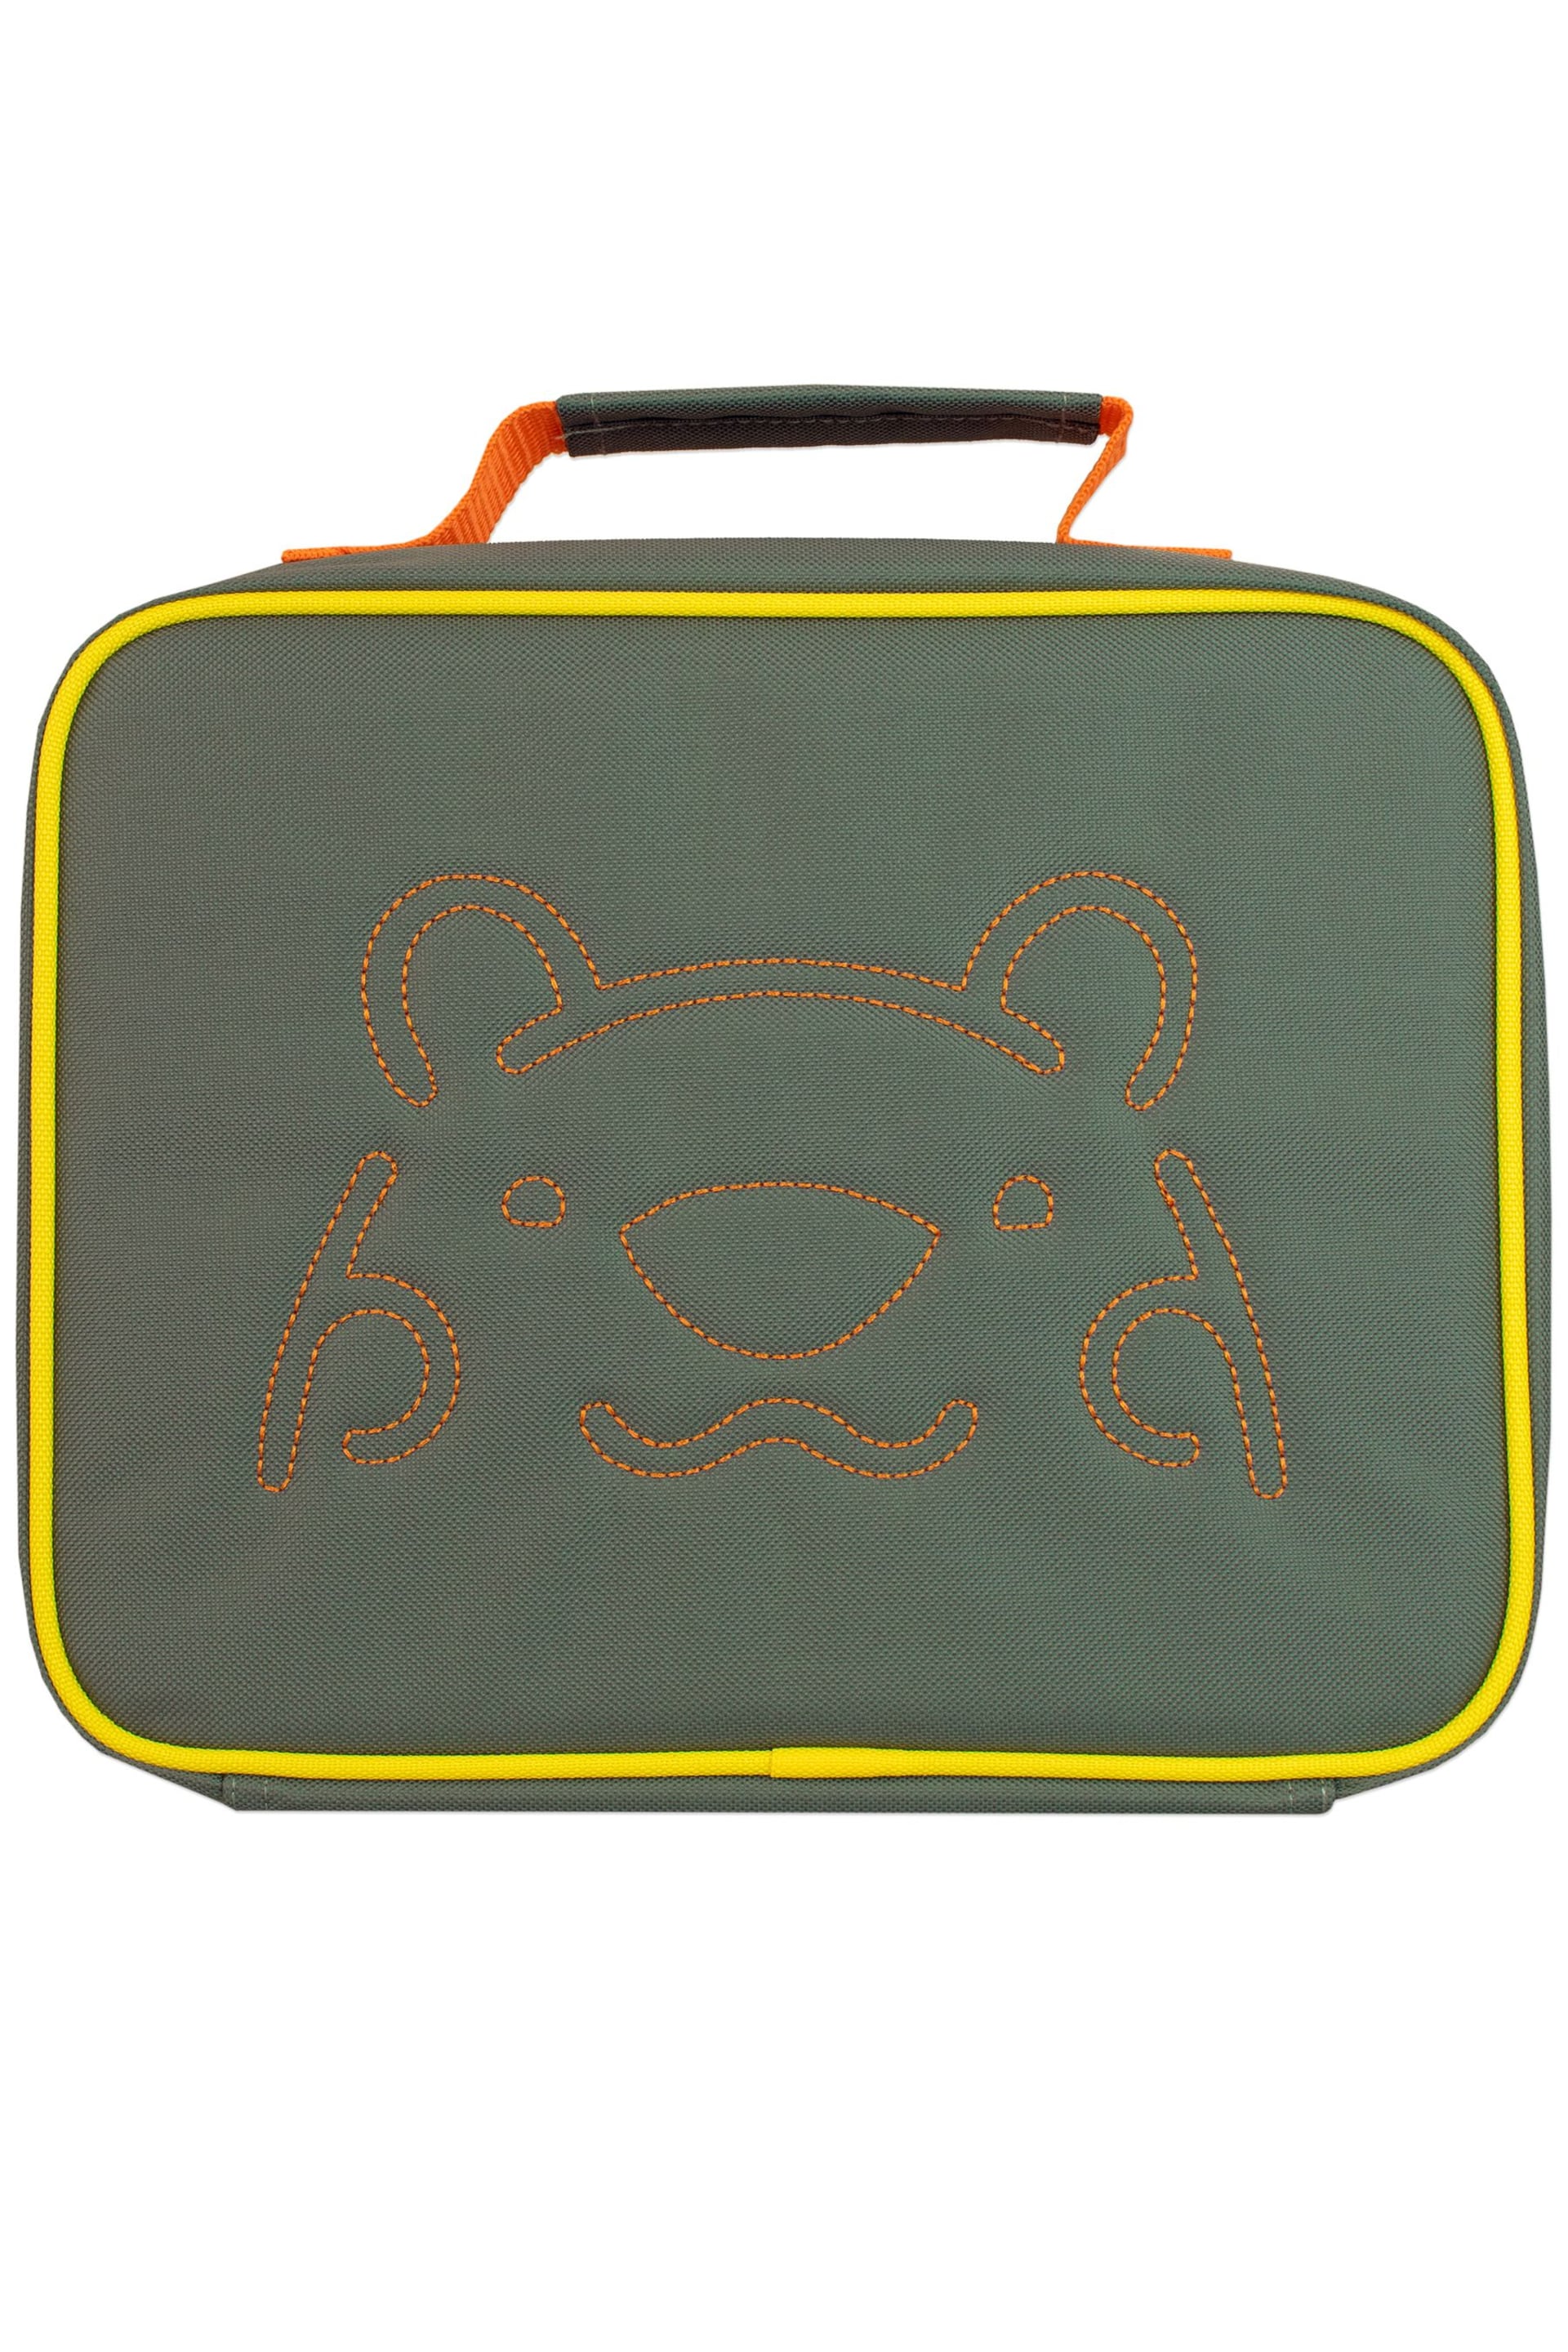 Harry Bear Green Digger Boys Lunch Bag - Image 4 of 5